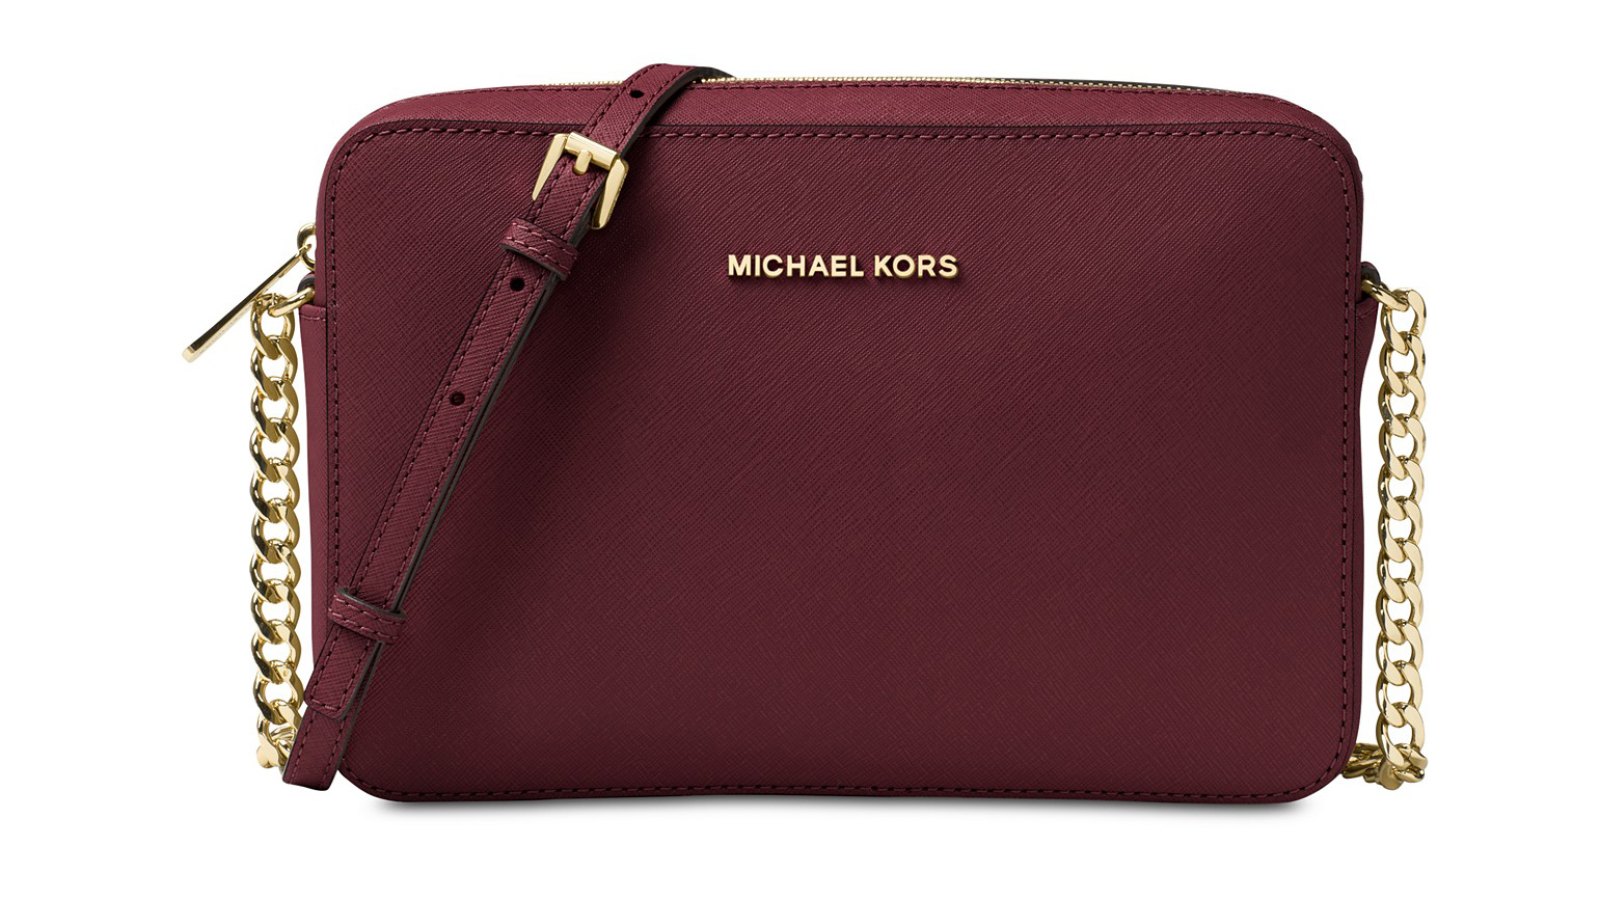 Over 1,000 Reviewers Love This $100 Michael Kors Cross-Body Purse